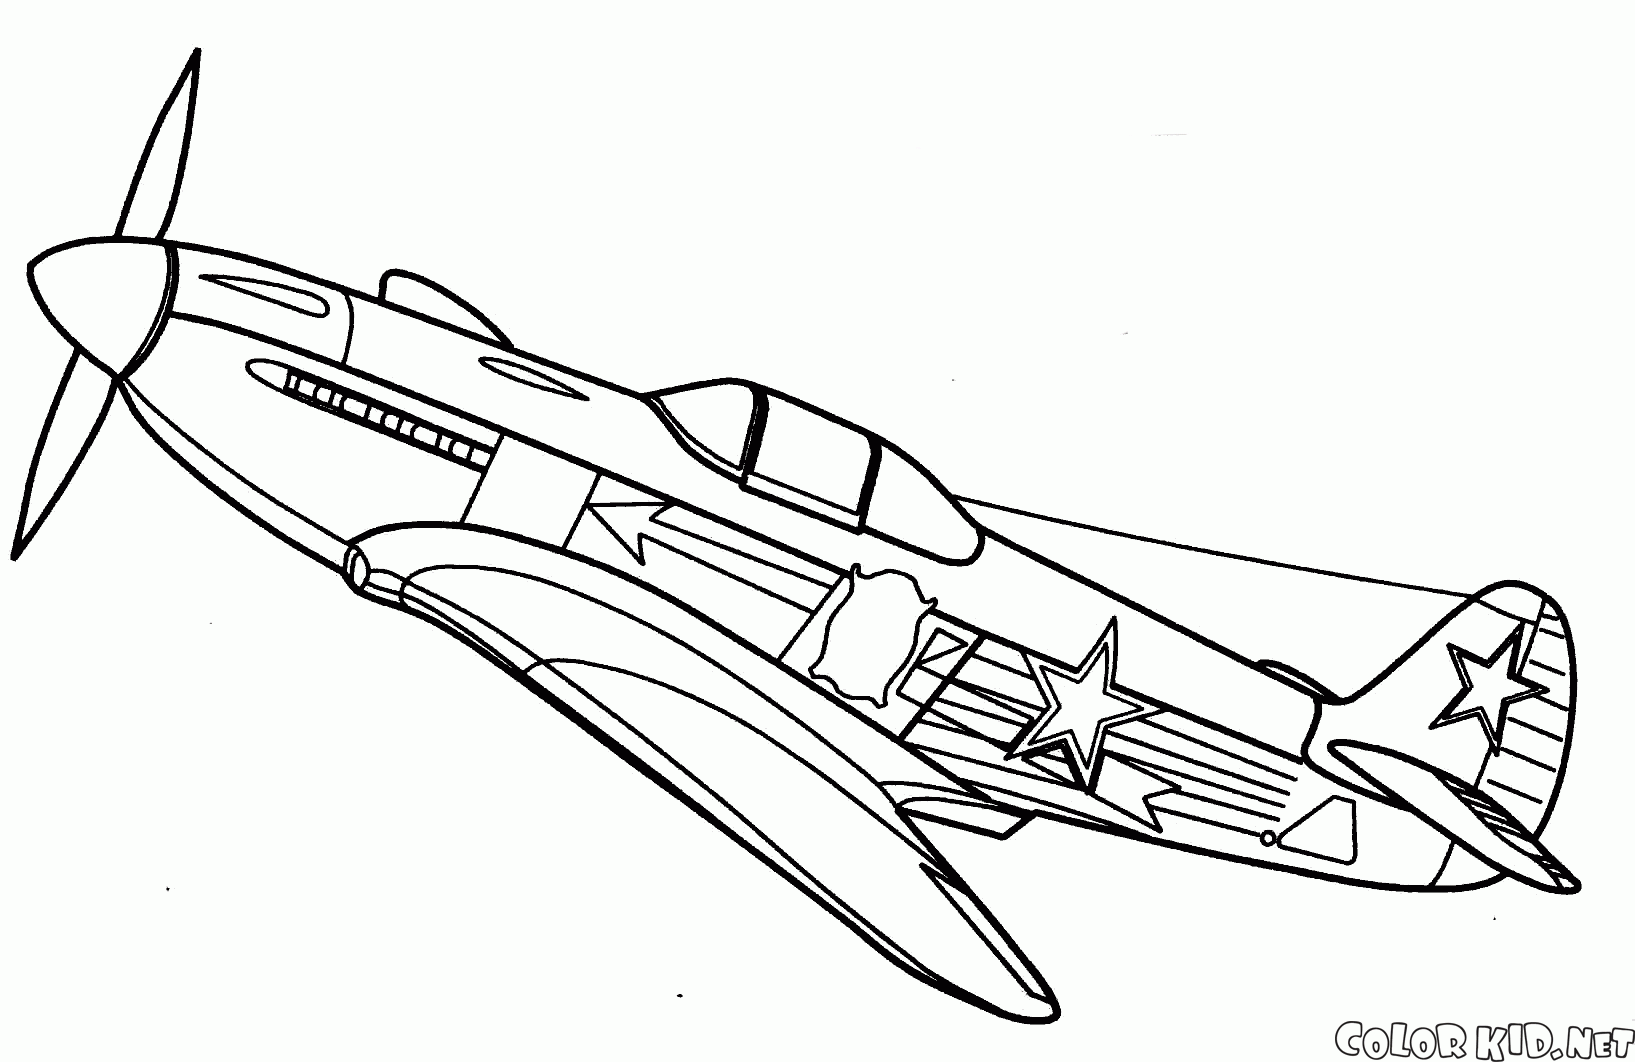 Coloring page - Yak-9r fighter aircraft